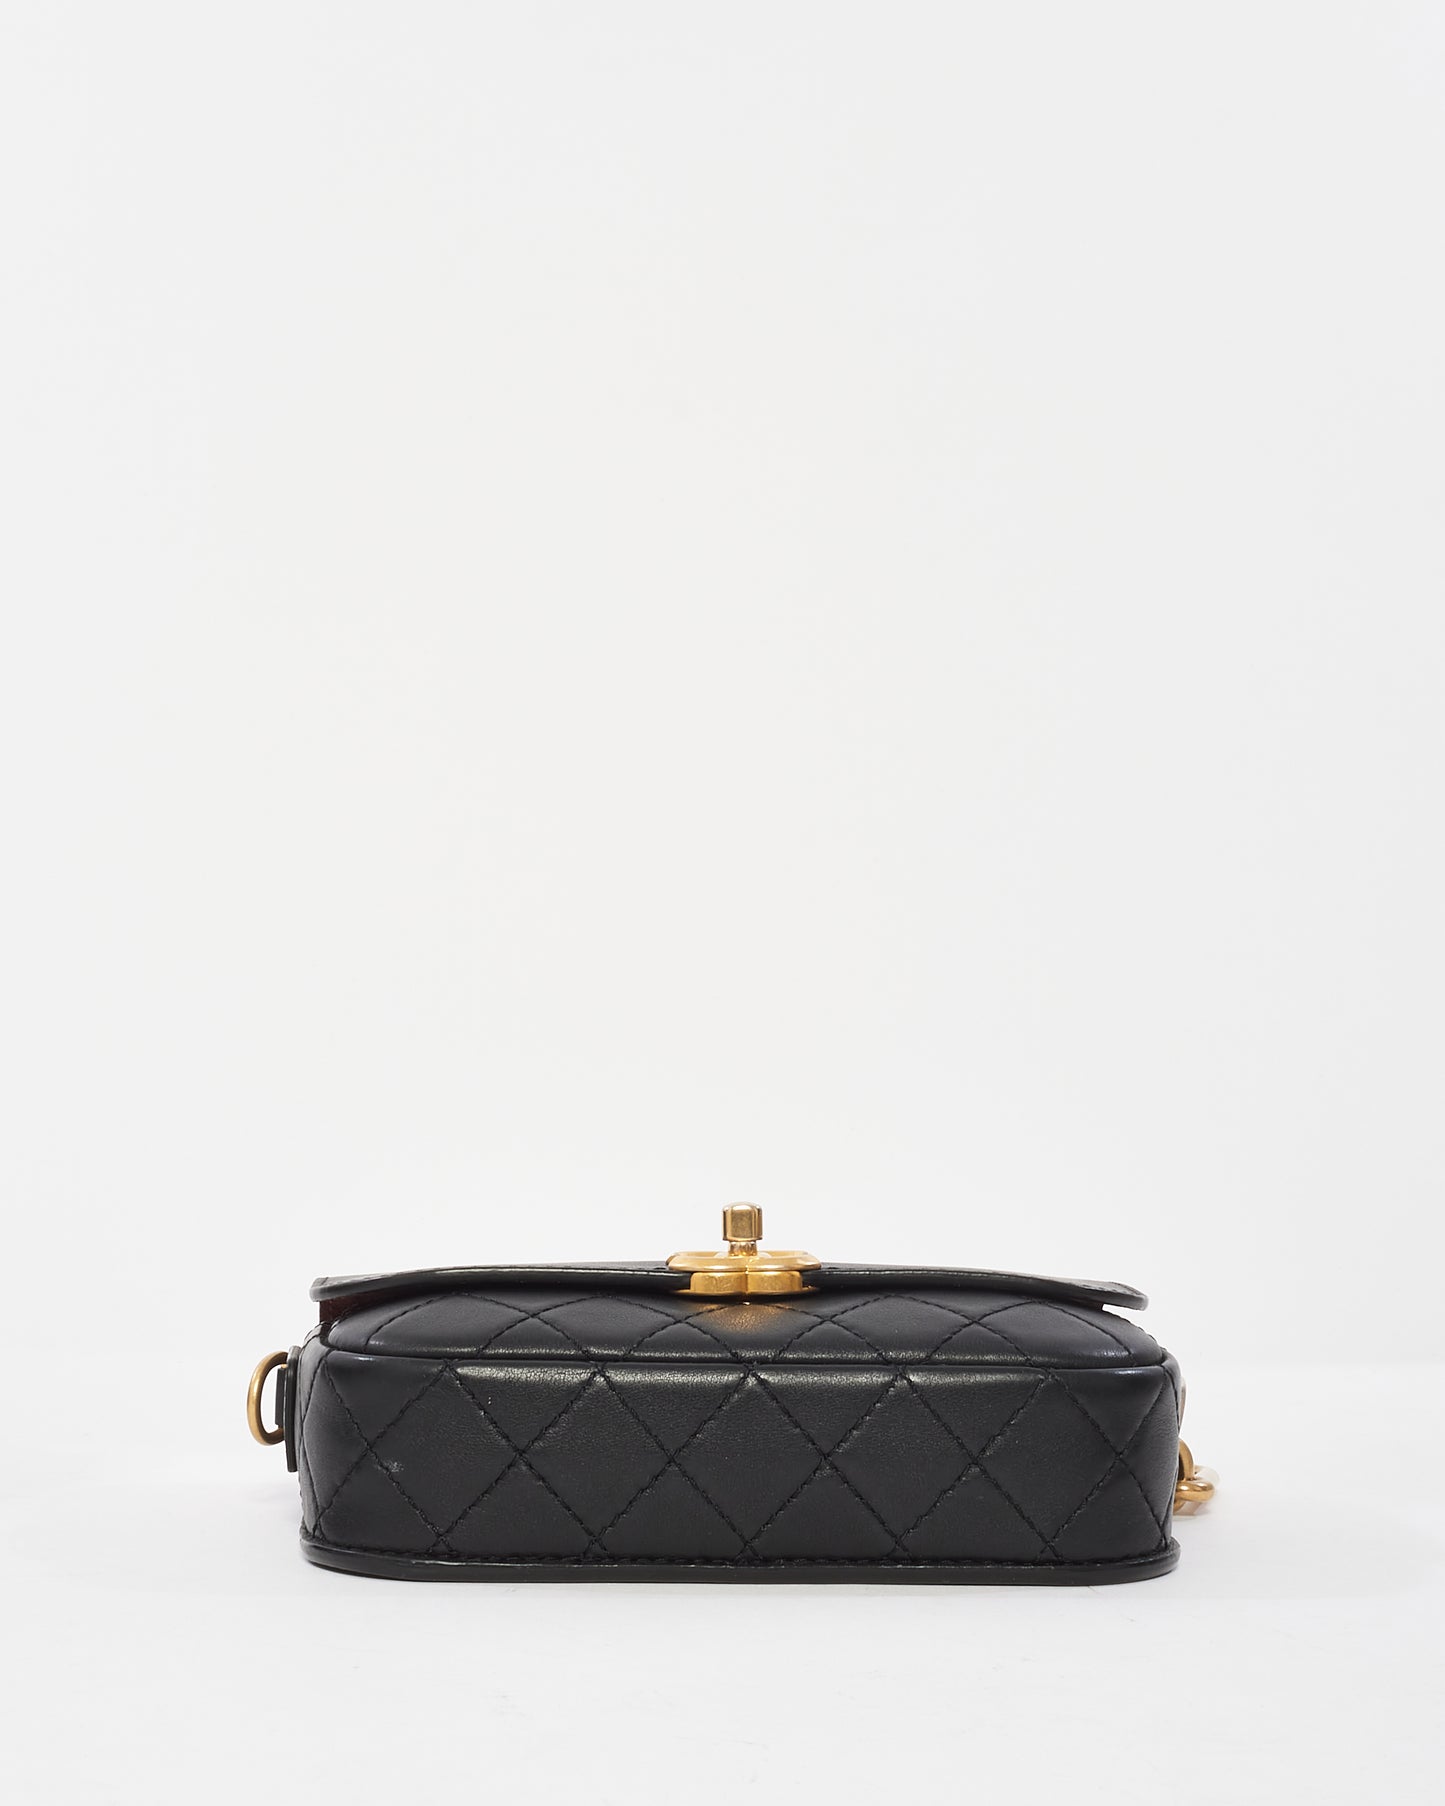 Chanel Black Calfskin Leather Multi Pouching Flap Bag With Coin Purse